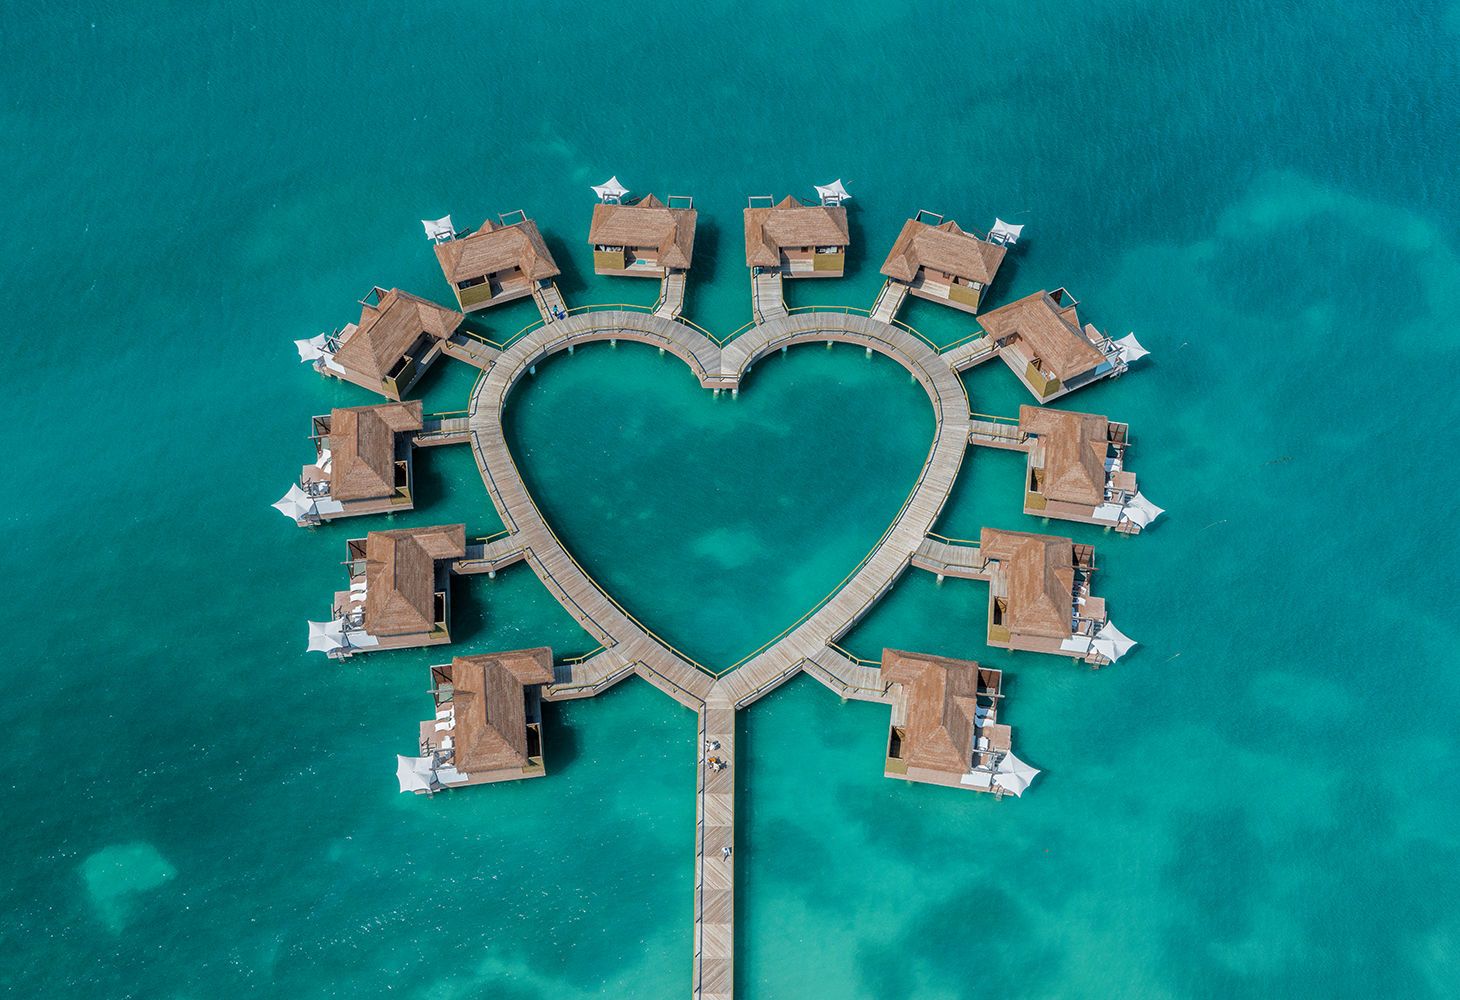 importere Kvittering bånd Luxurious Overwater Bungalows Near The U.S.A. | SANDALS